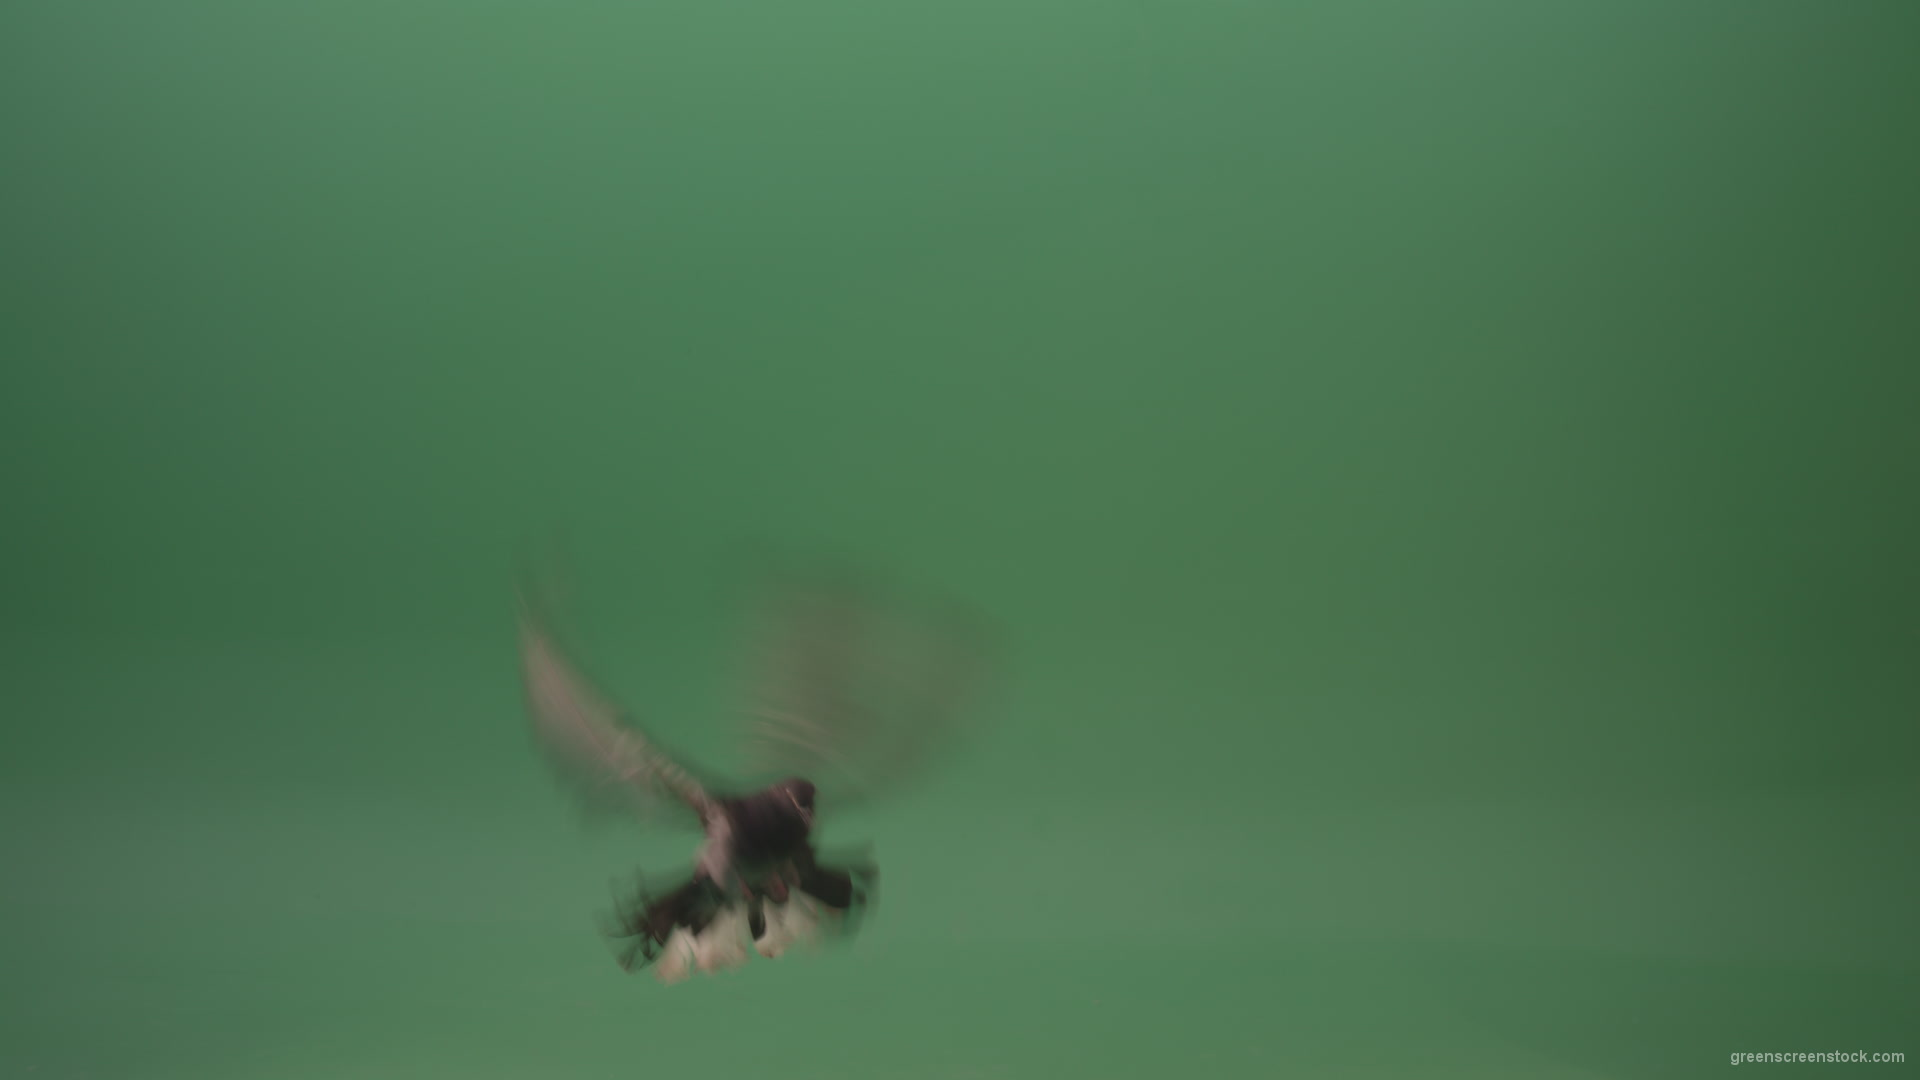 Great-flight-of-blue-bird-breed-of-pigeons-isolated-on-green-screen_007 Green Screen Stock